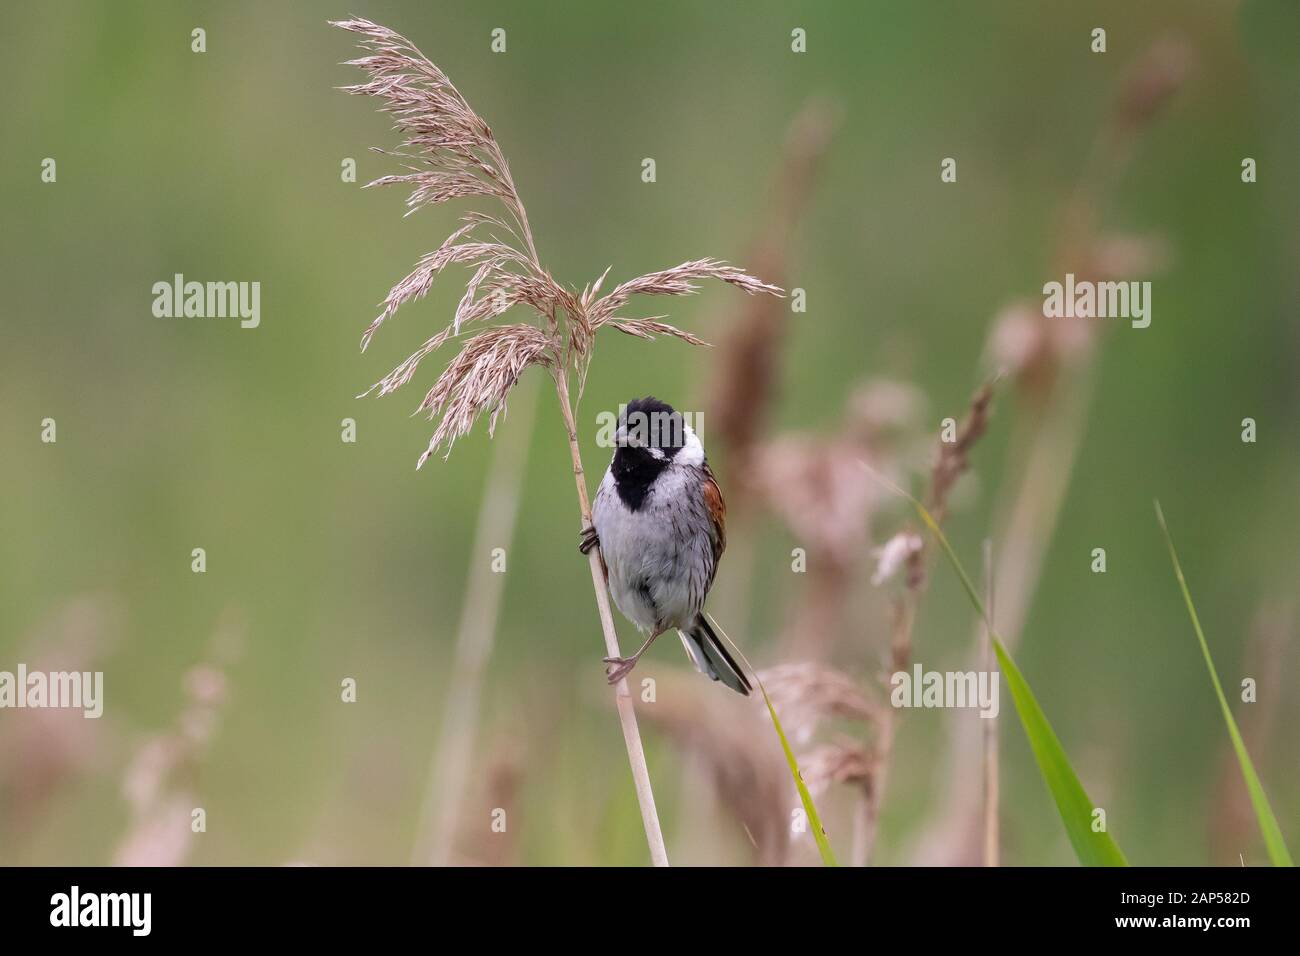 A reed bunting perched high on a common reed against a soft focus wetland background Stock Photo